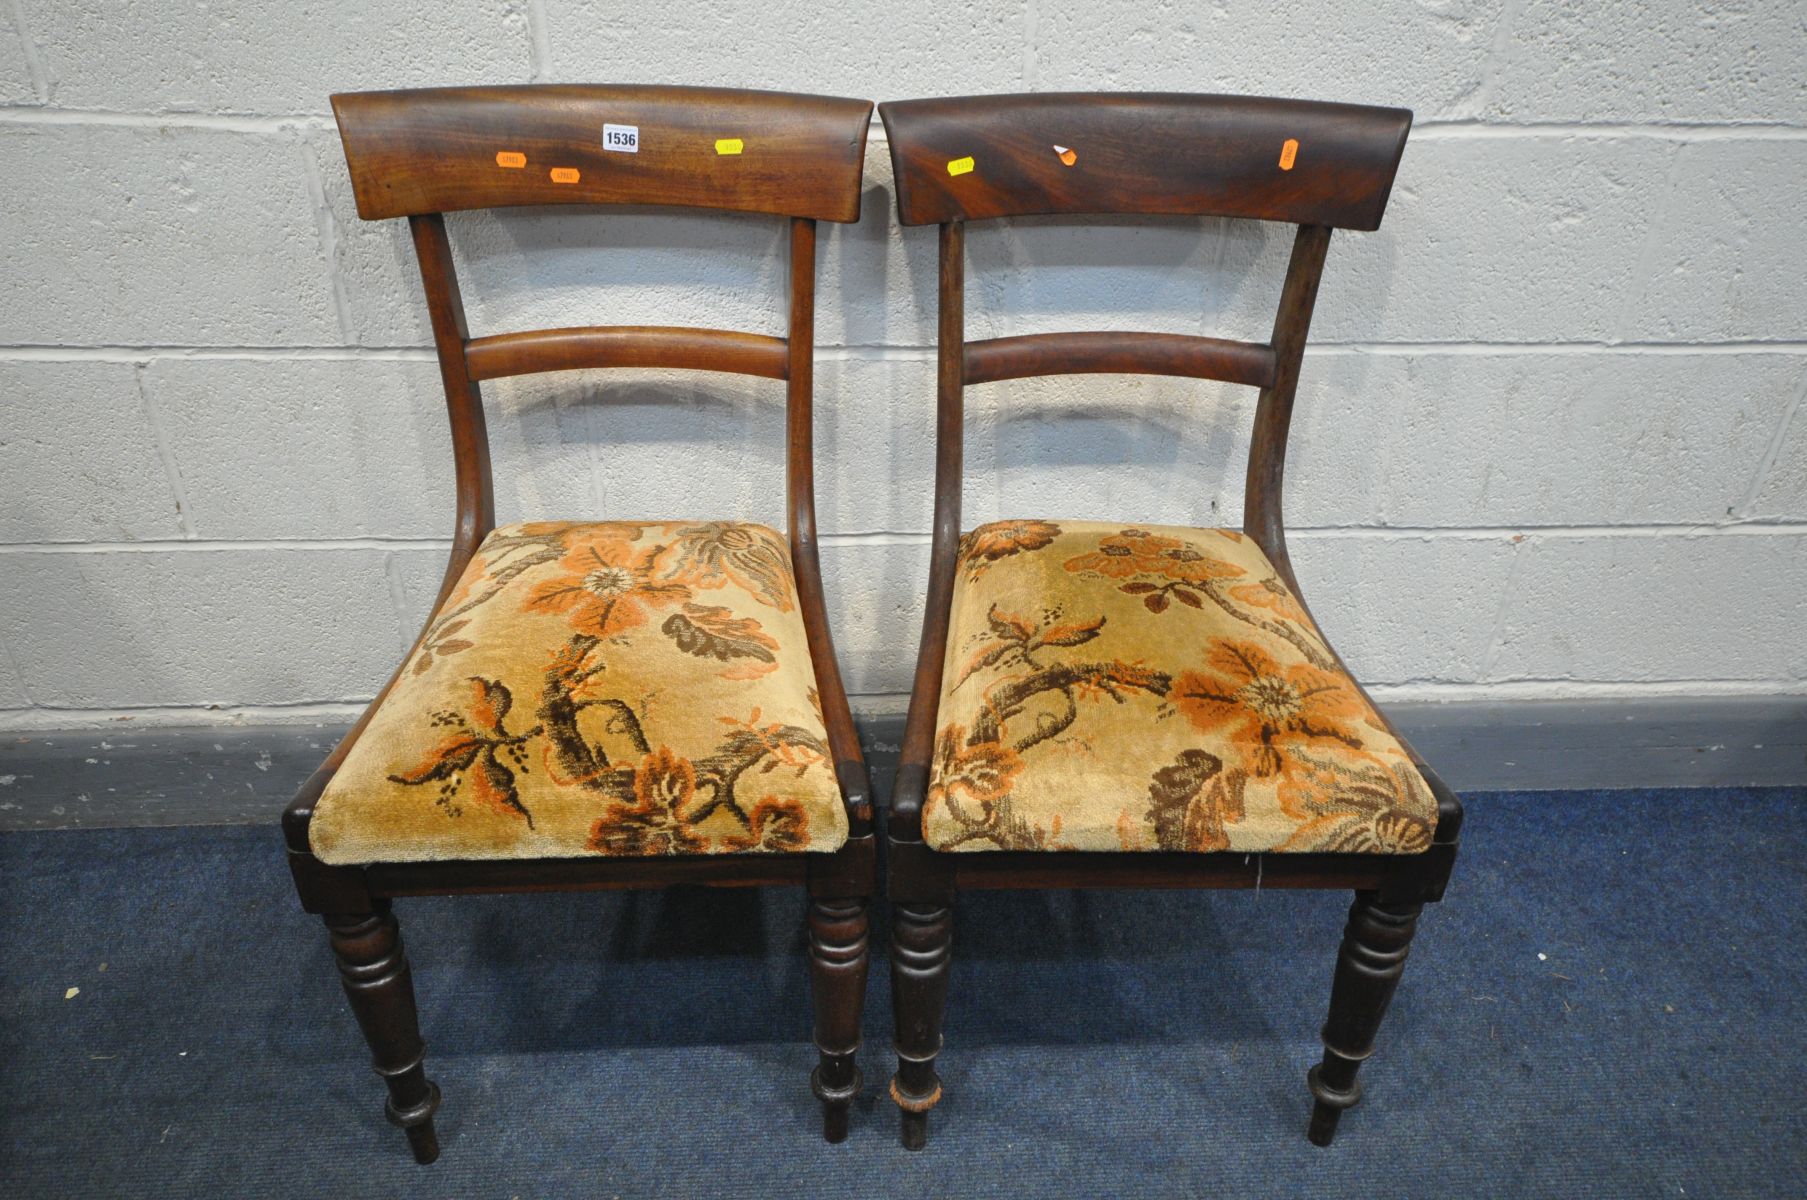 A PAIR OF REGENCY MAHOGANY BAR BACK CHAIRS, with floral upholstered seat pads, turned front legs (